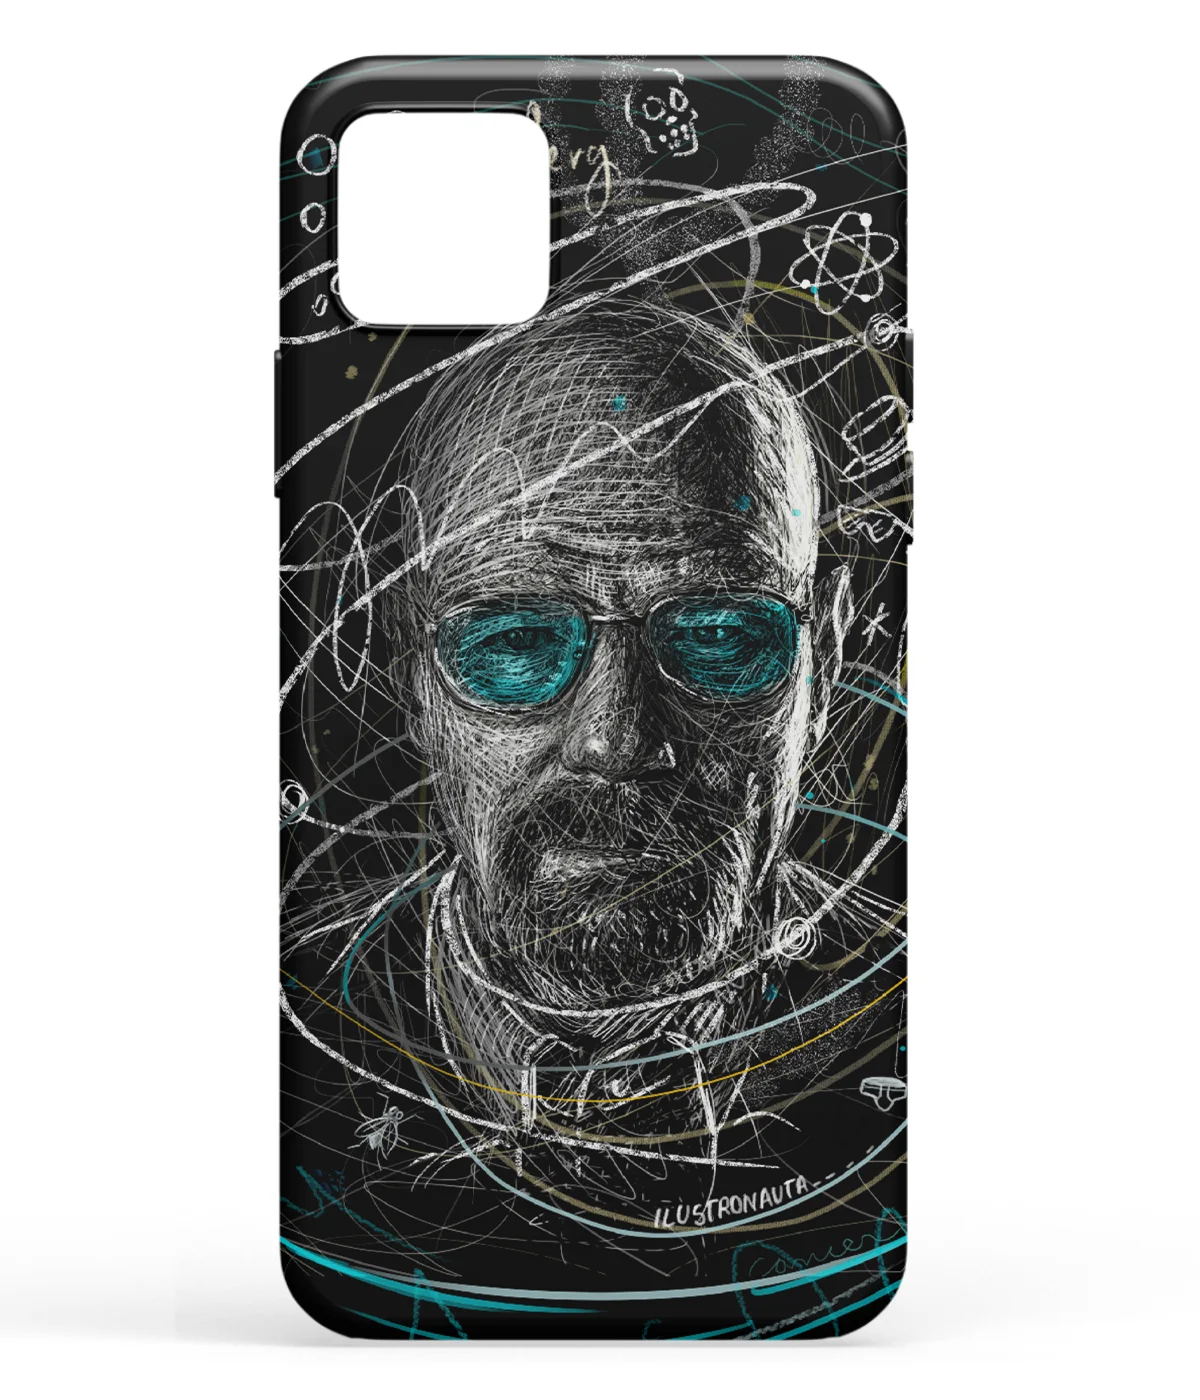 Hiesenberg Illustration Printed Soft Silicone Mobile Back Cover